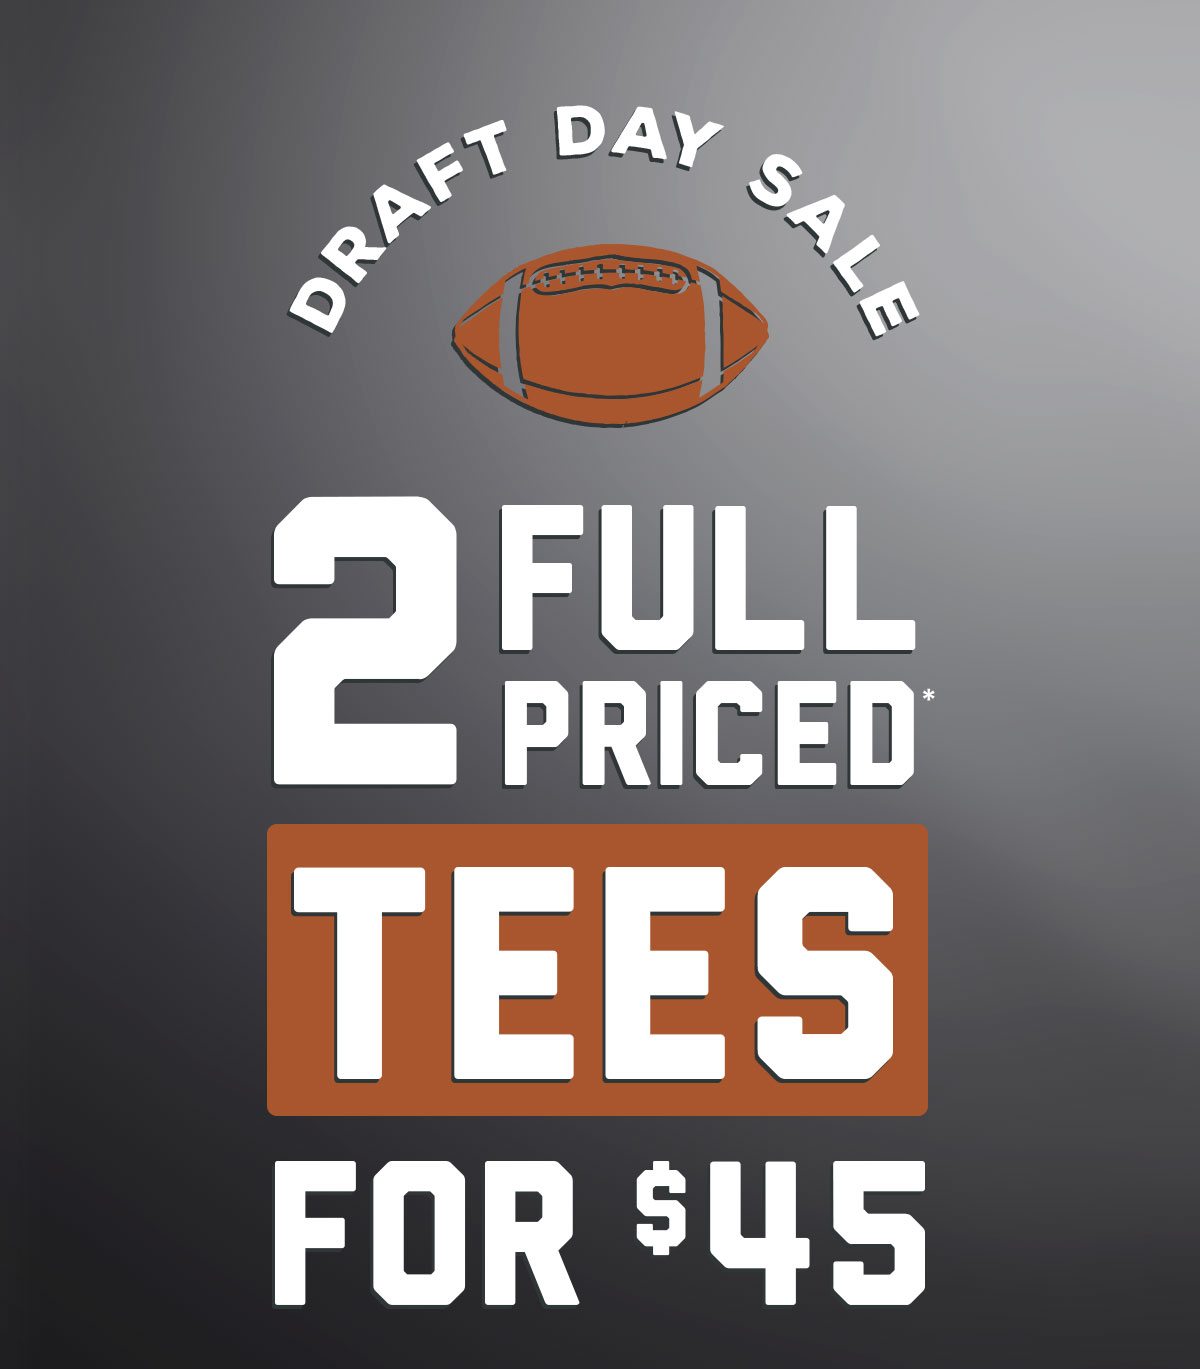 Draft Day Sale! Shop 2 full-priced tees for only $45. Online and in store, thru Friday.